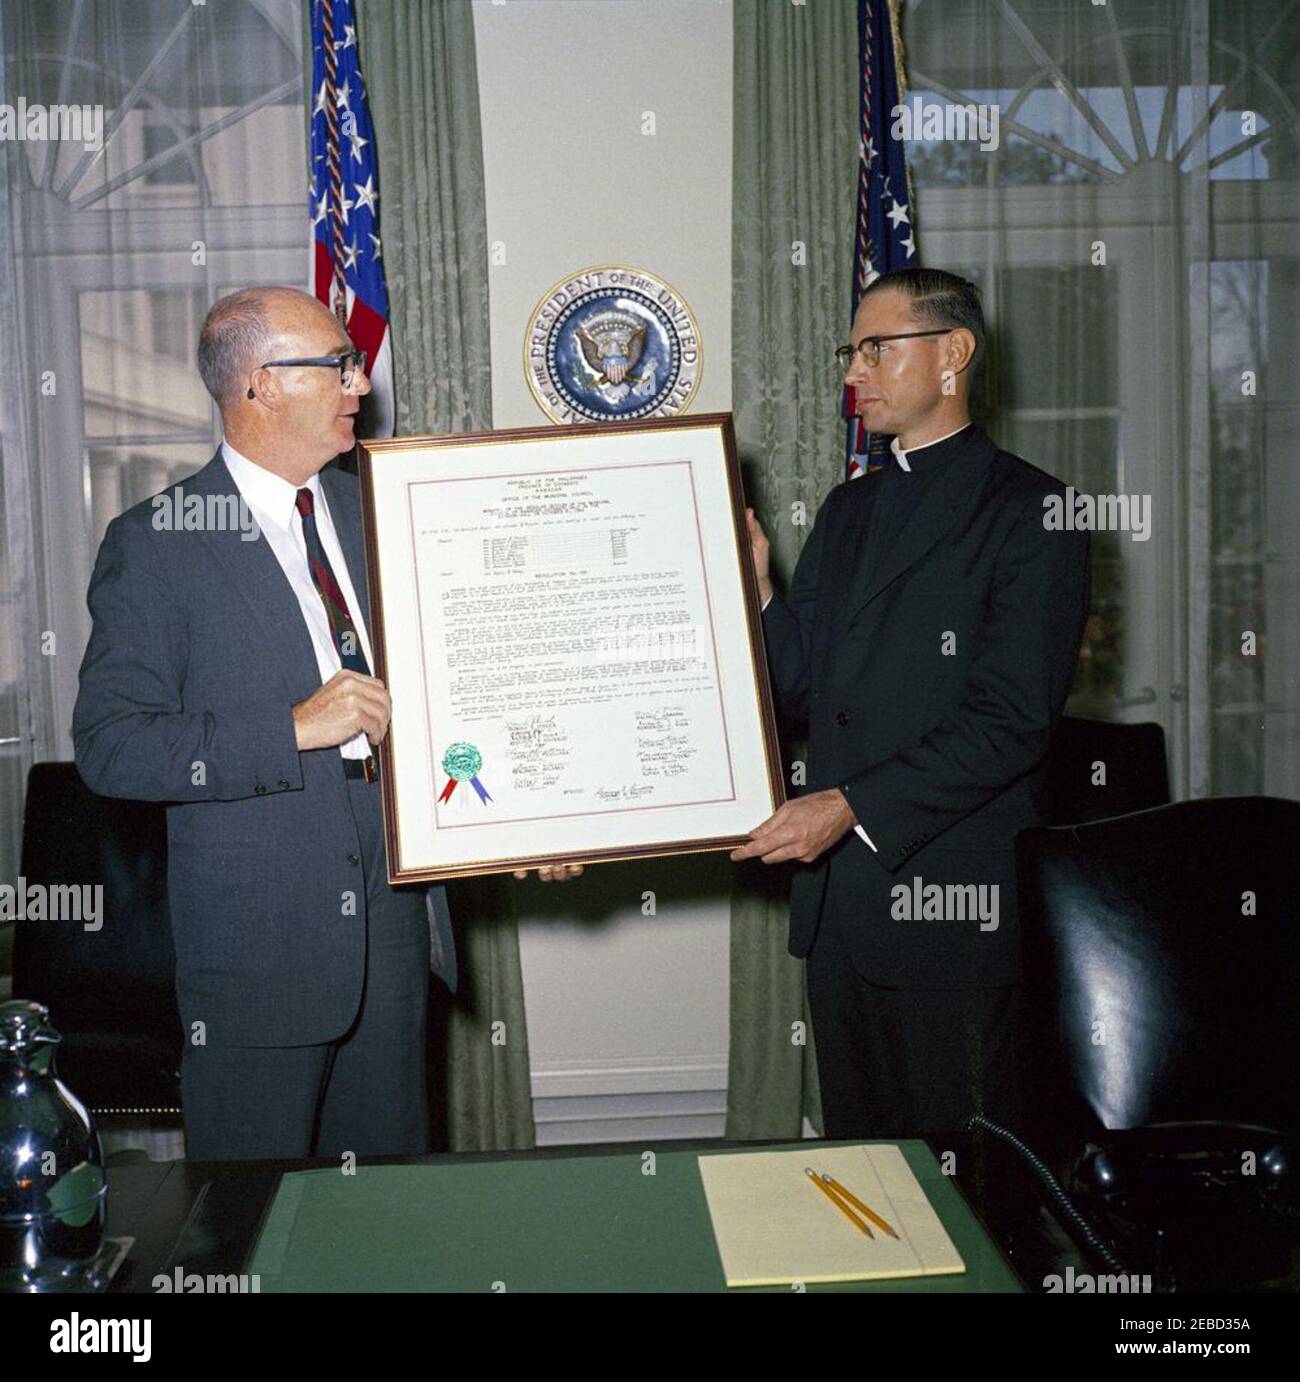 Resolution from the Province of Cotabato, Philippine Islands, presented to the White House. Presidential Assistant Dave Powers (left) accepts a resolution from Kabacan, in the Province of Cotabato, Republic of the Philippines (Philippine Islands); man at right is unidentified. Cabinet Room, White House, Washington, D.C. Stock Photo